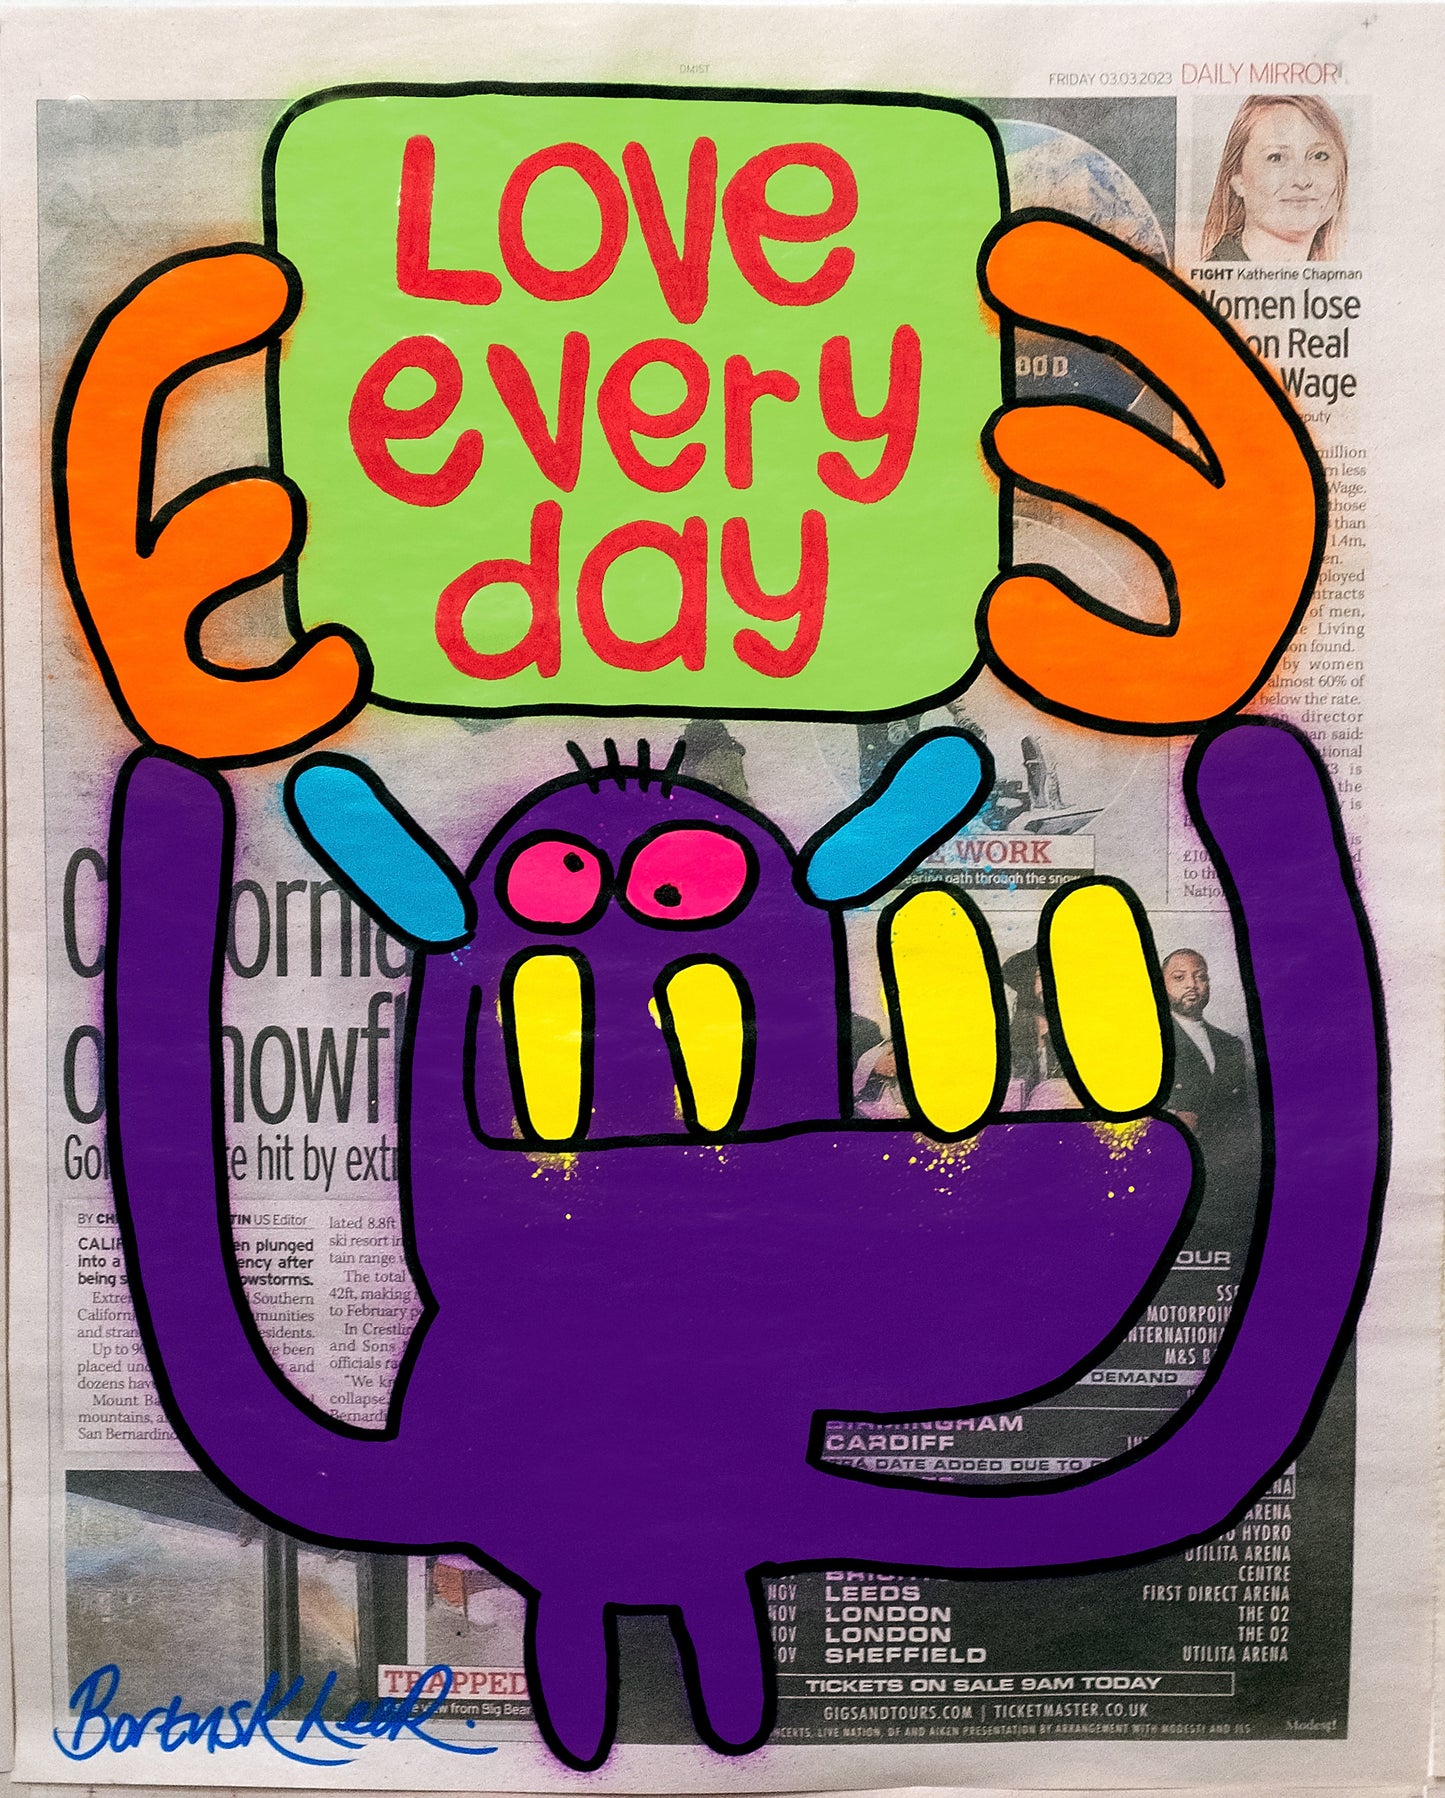 Love every day by Bortusk Leer